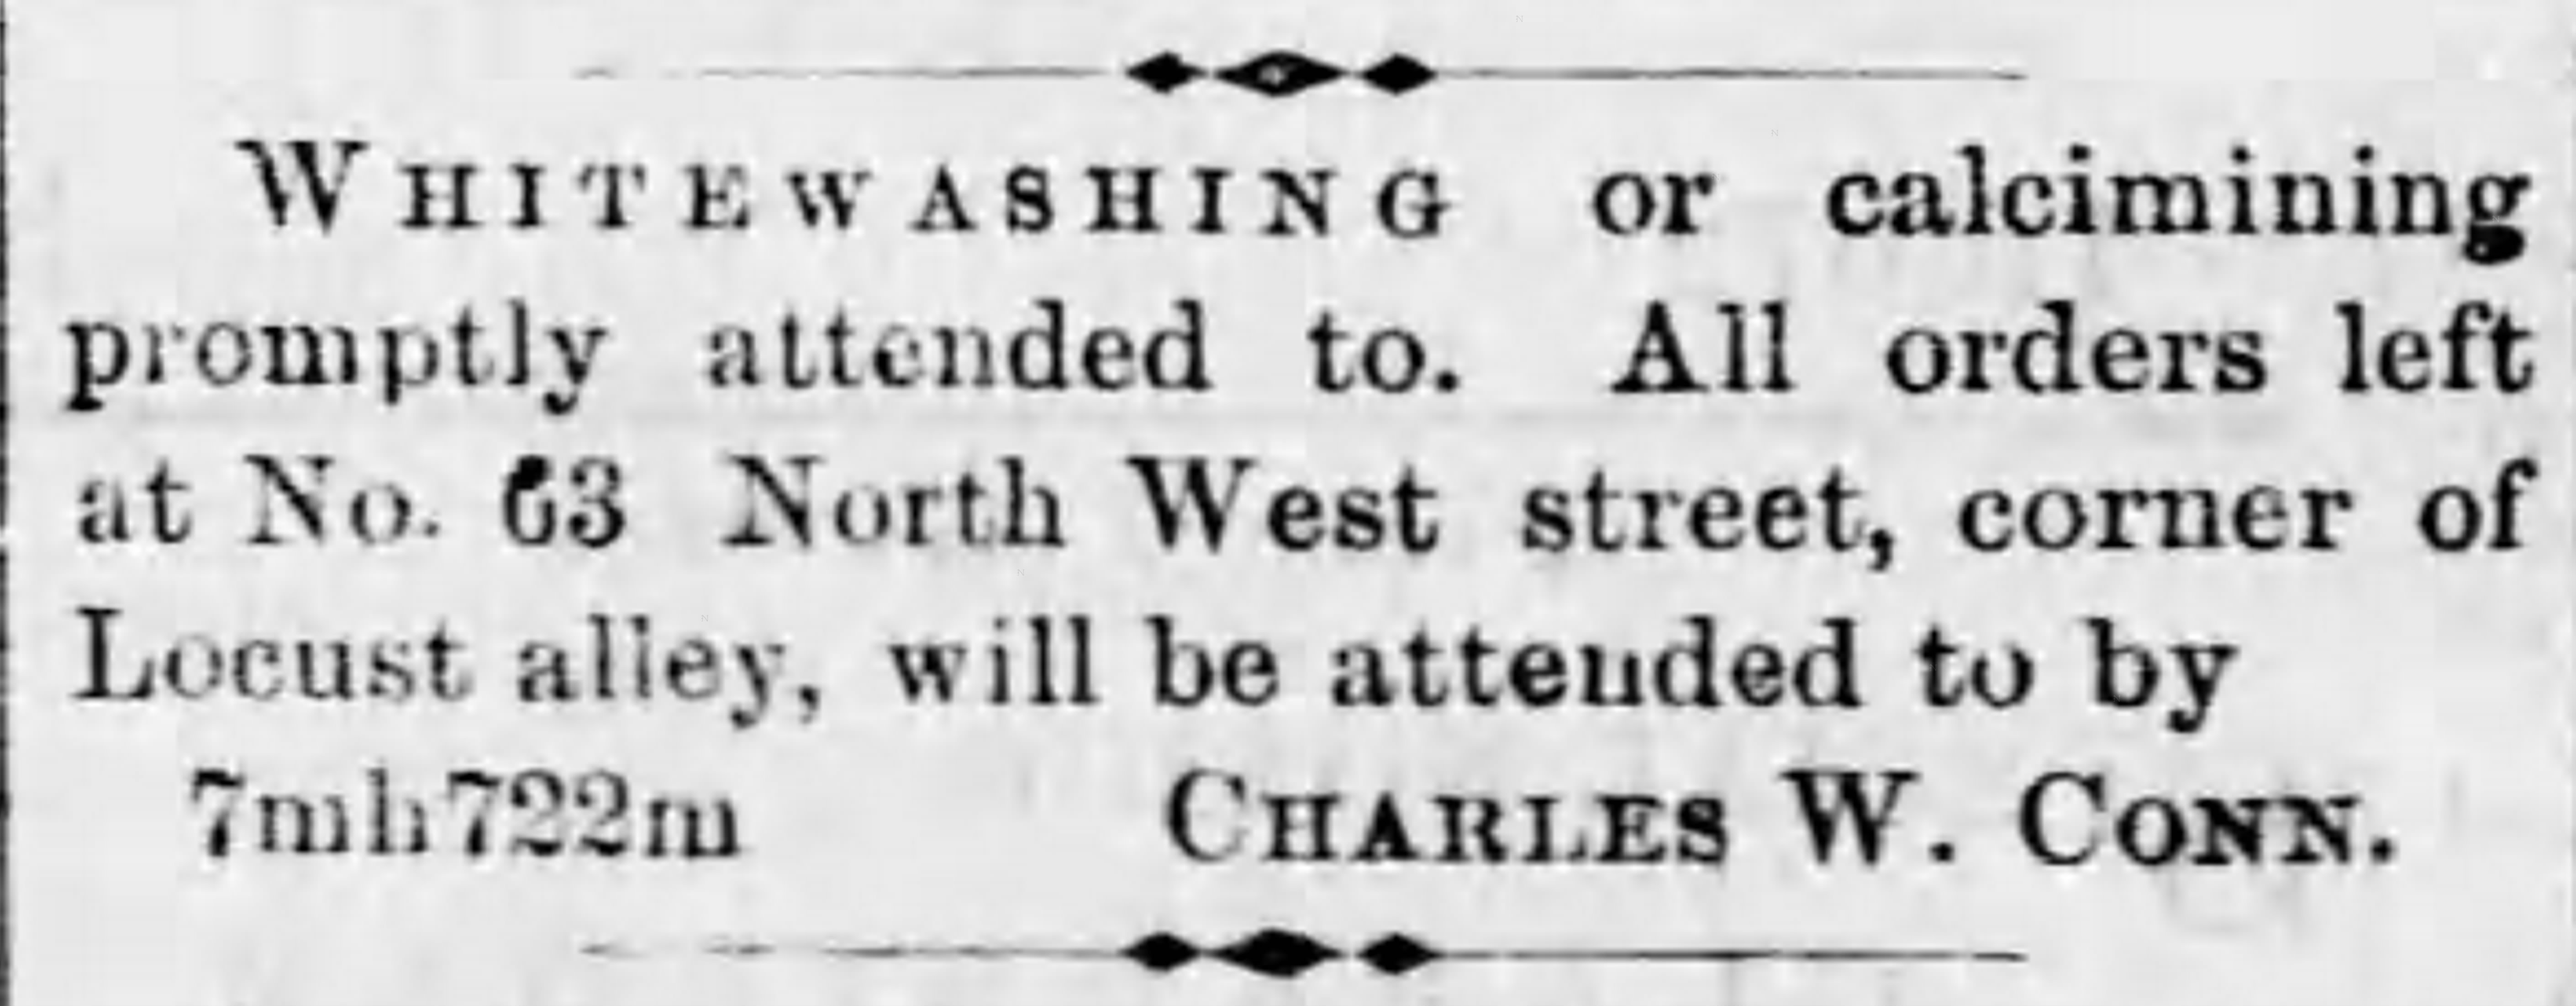 A newspaper advertisement for Charles Conn's whitewashing business